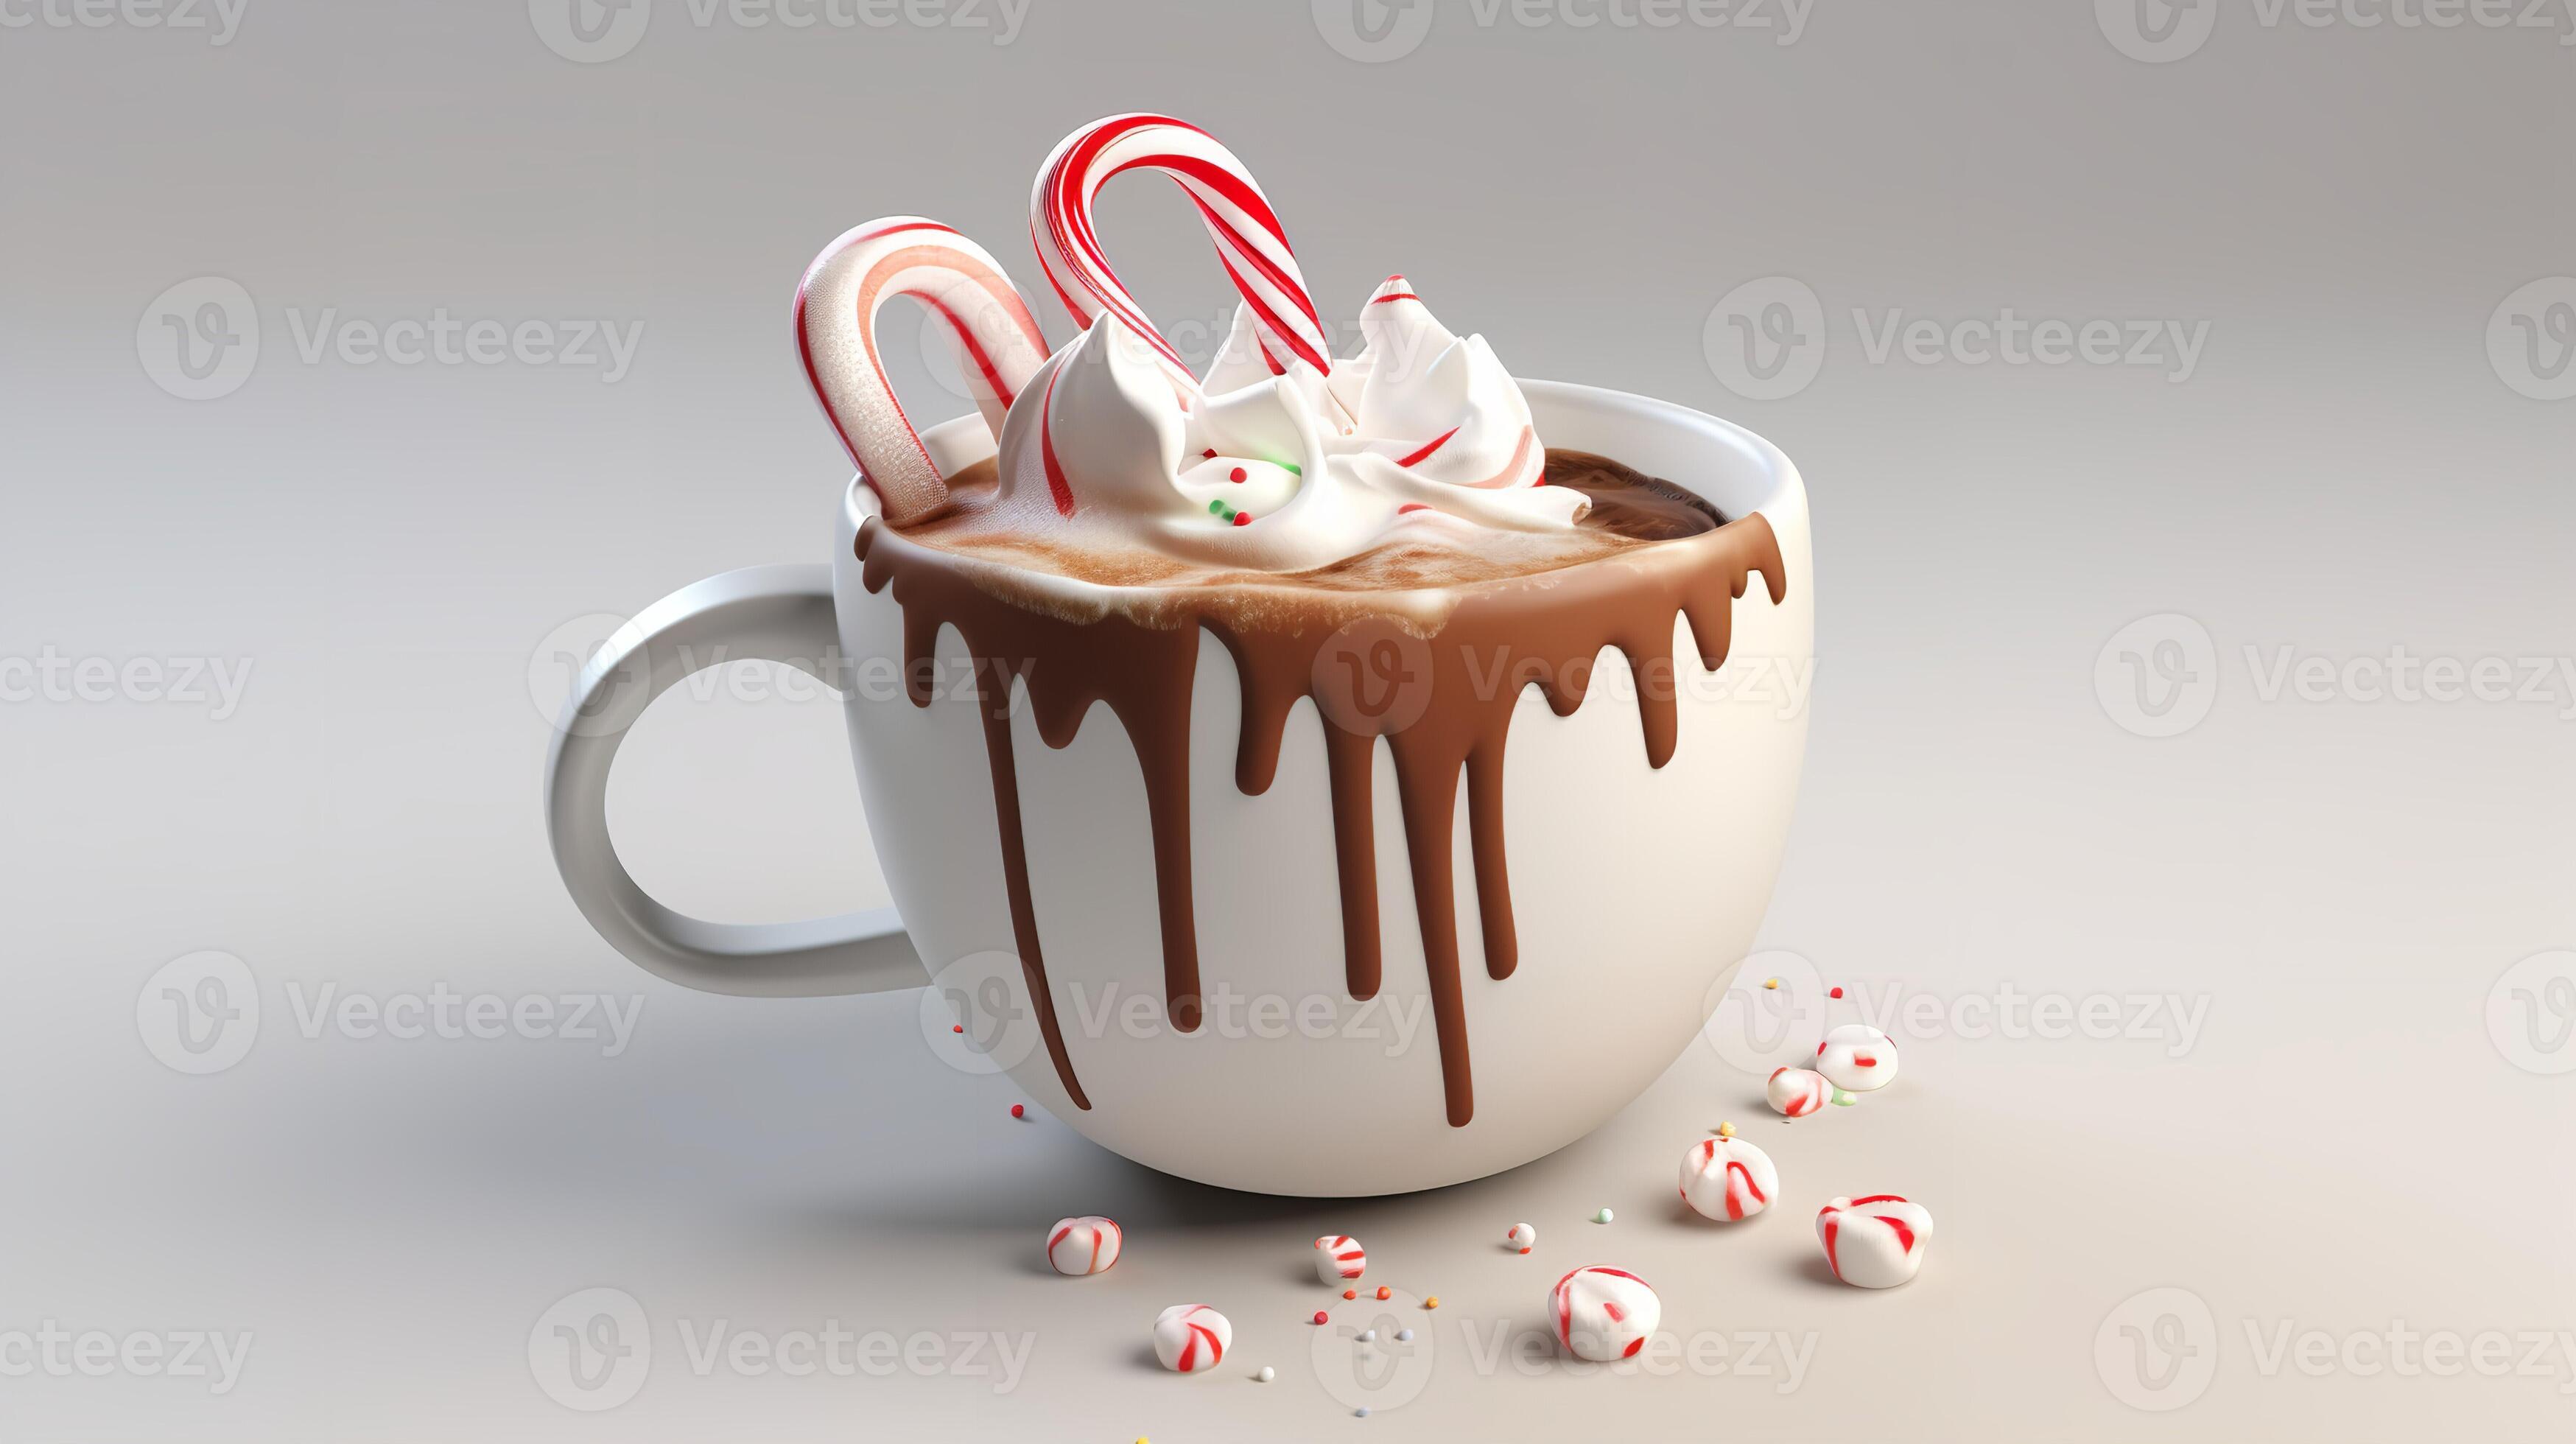 https://static.vecteezy.com/system/resources/previews/024/351/288/large_2x/3d-clipart-of-christmas-hot-chocolate-photo.jpg